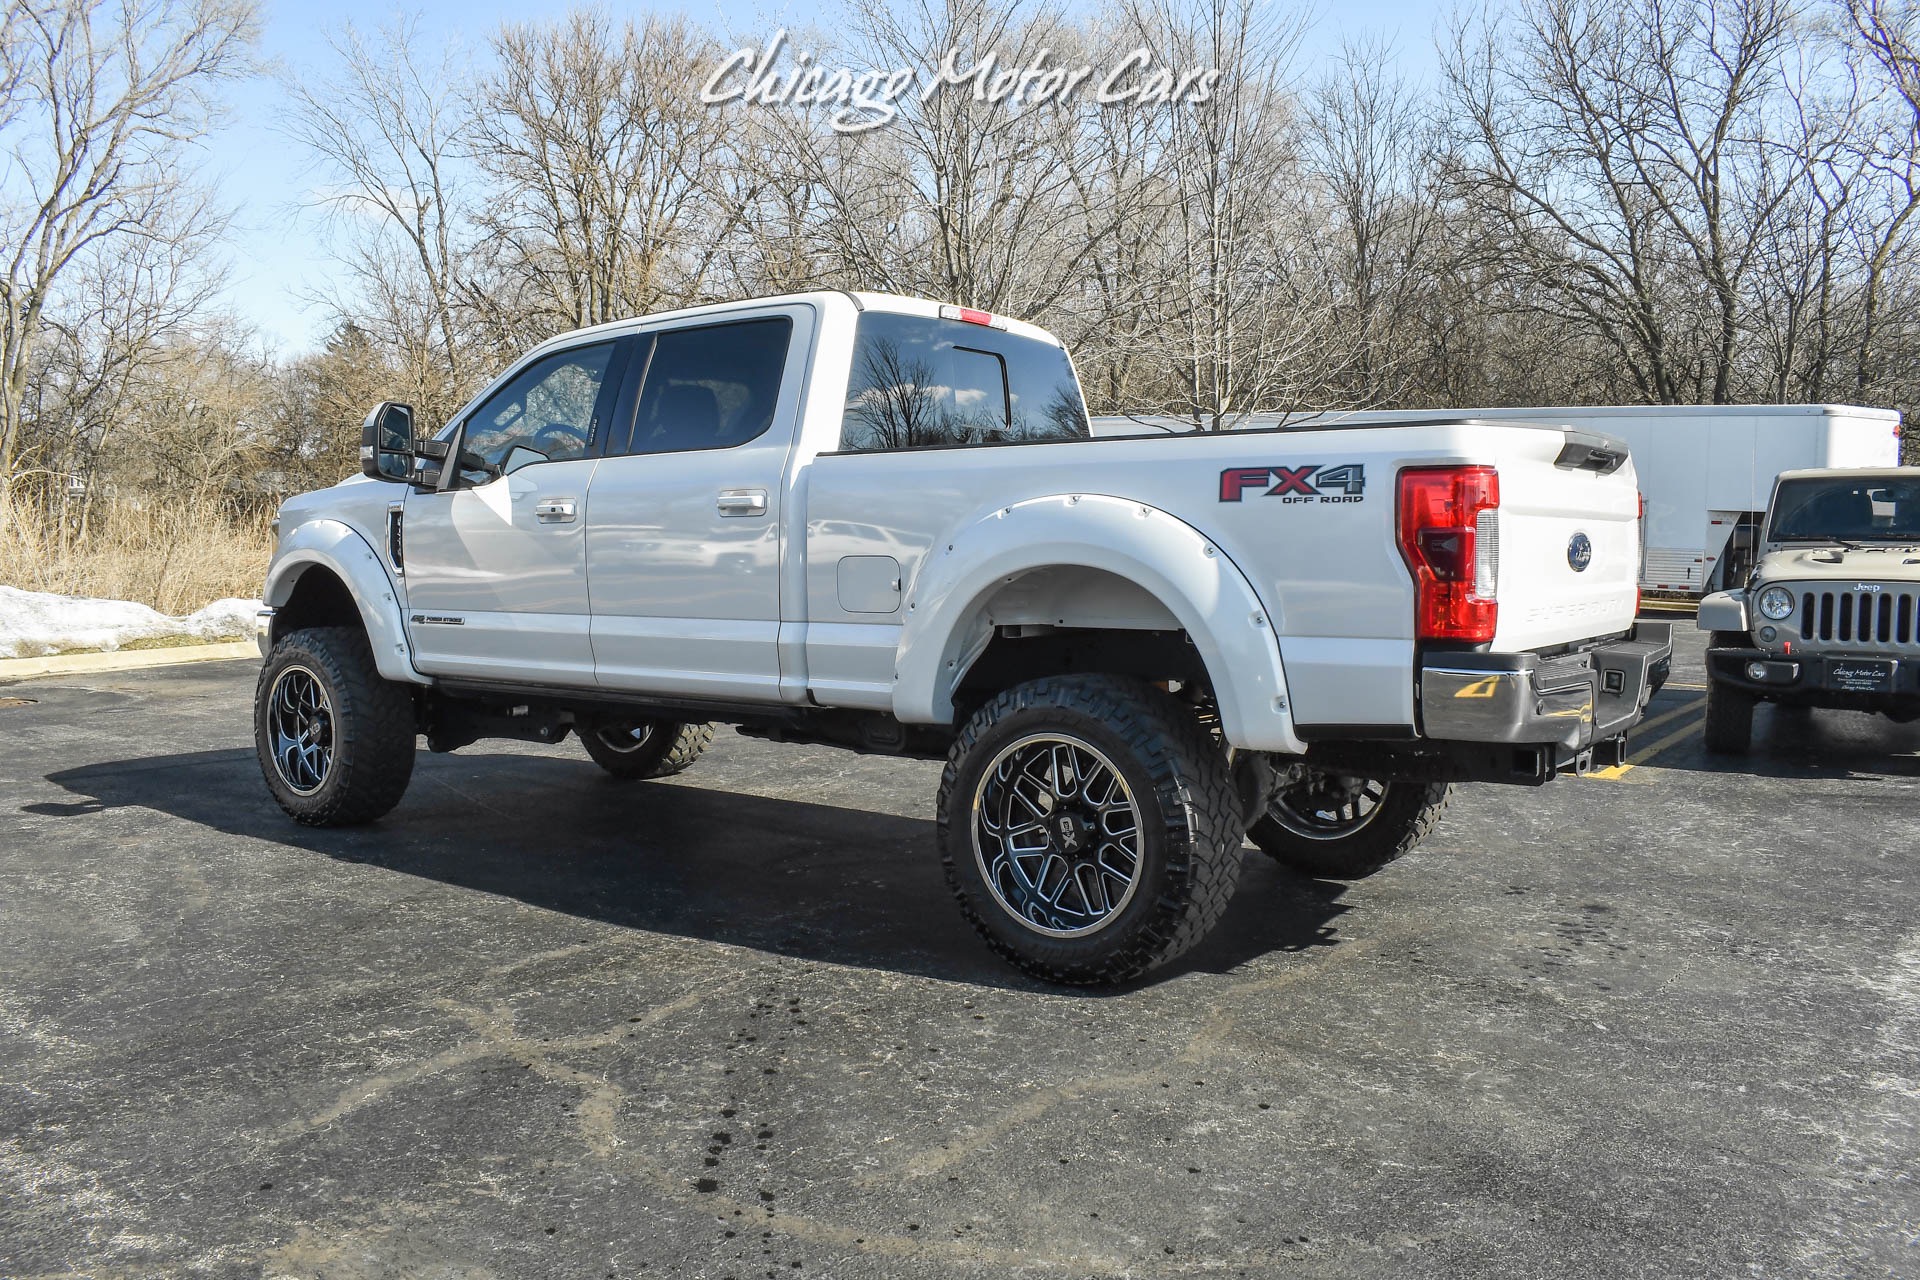 Used-2018-Ford-F-250-Super-Duty-Lariat-4X4-Crew-Cab-Upgrades-FX4-Off-Road-Package-67L-Diesel